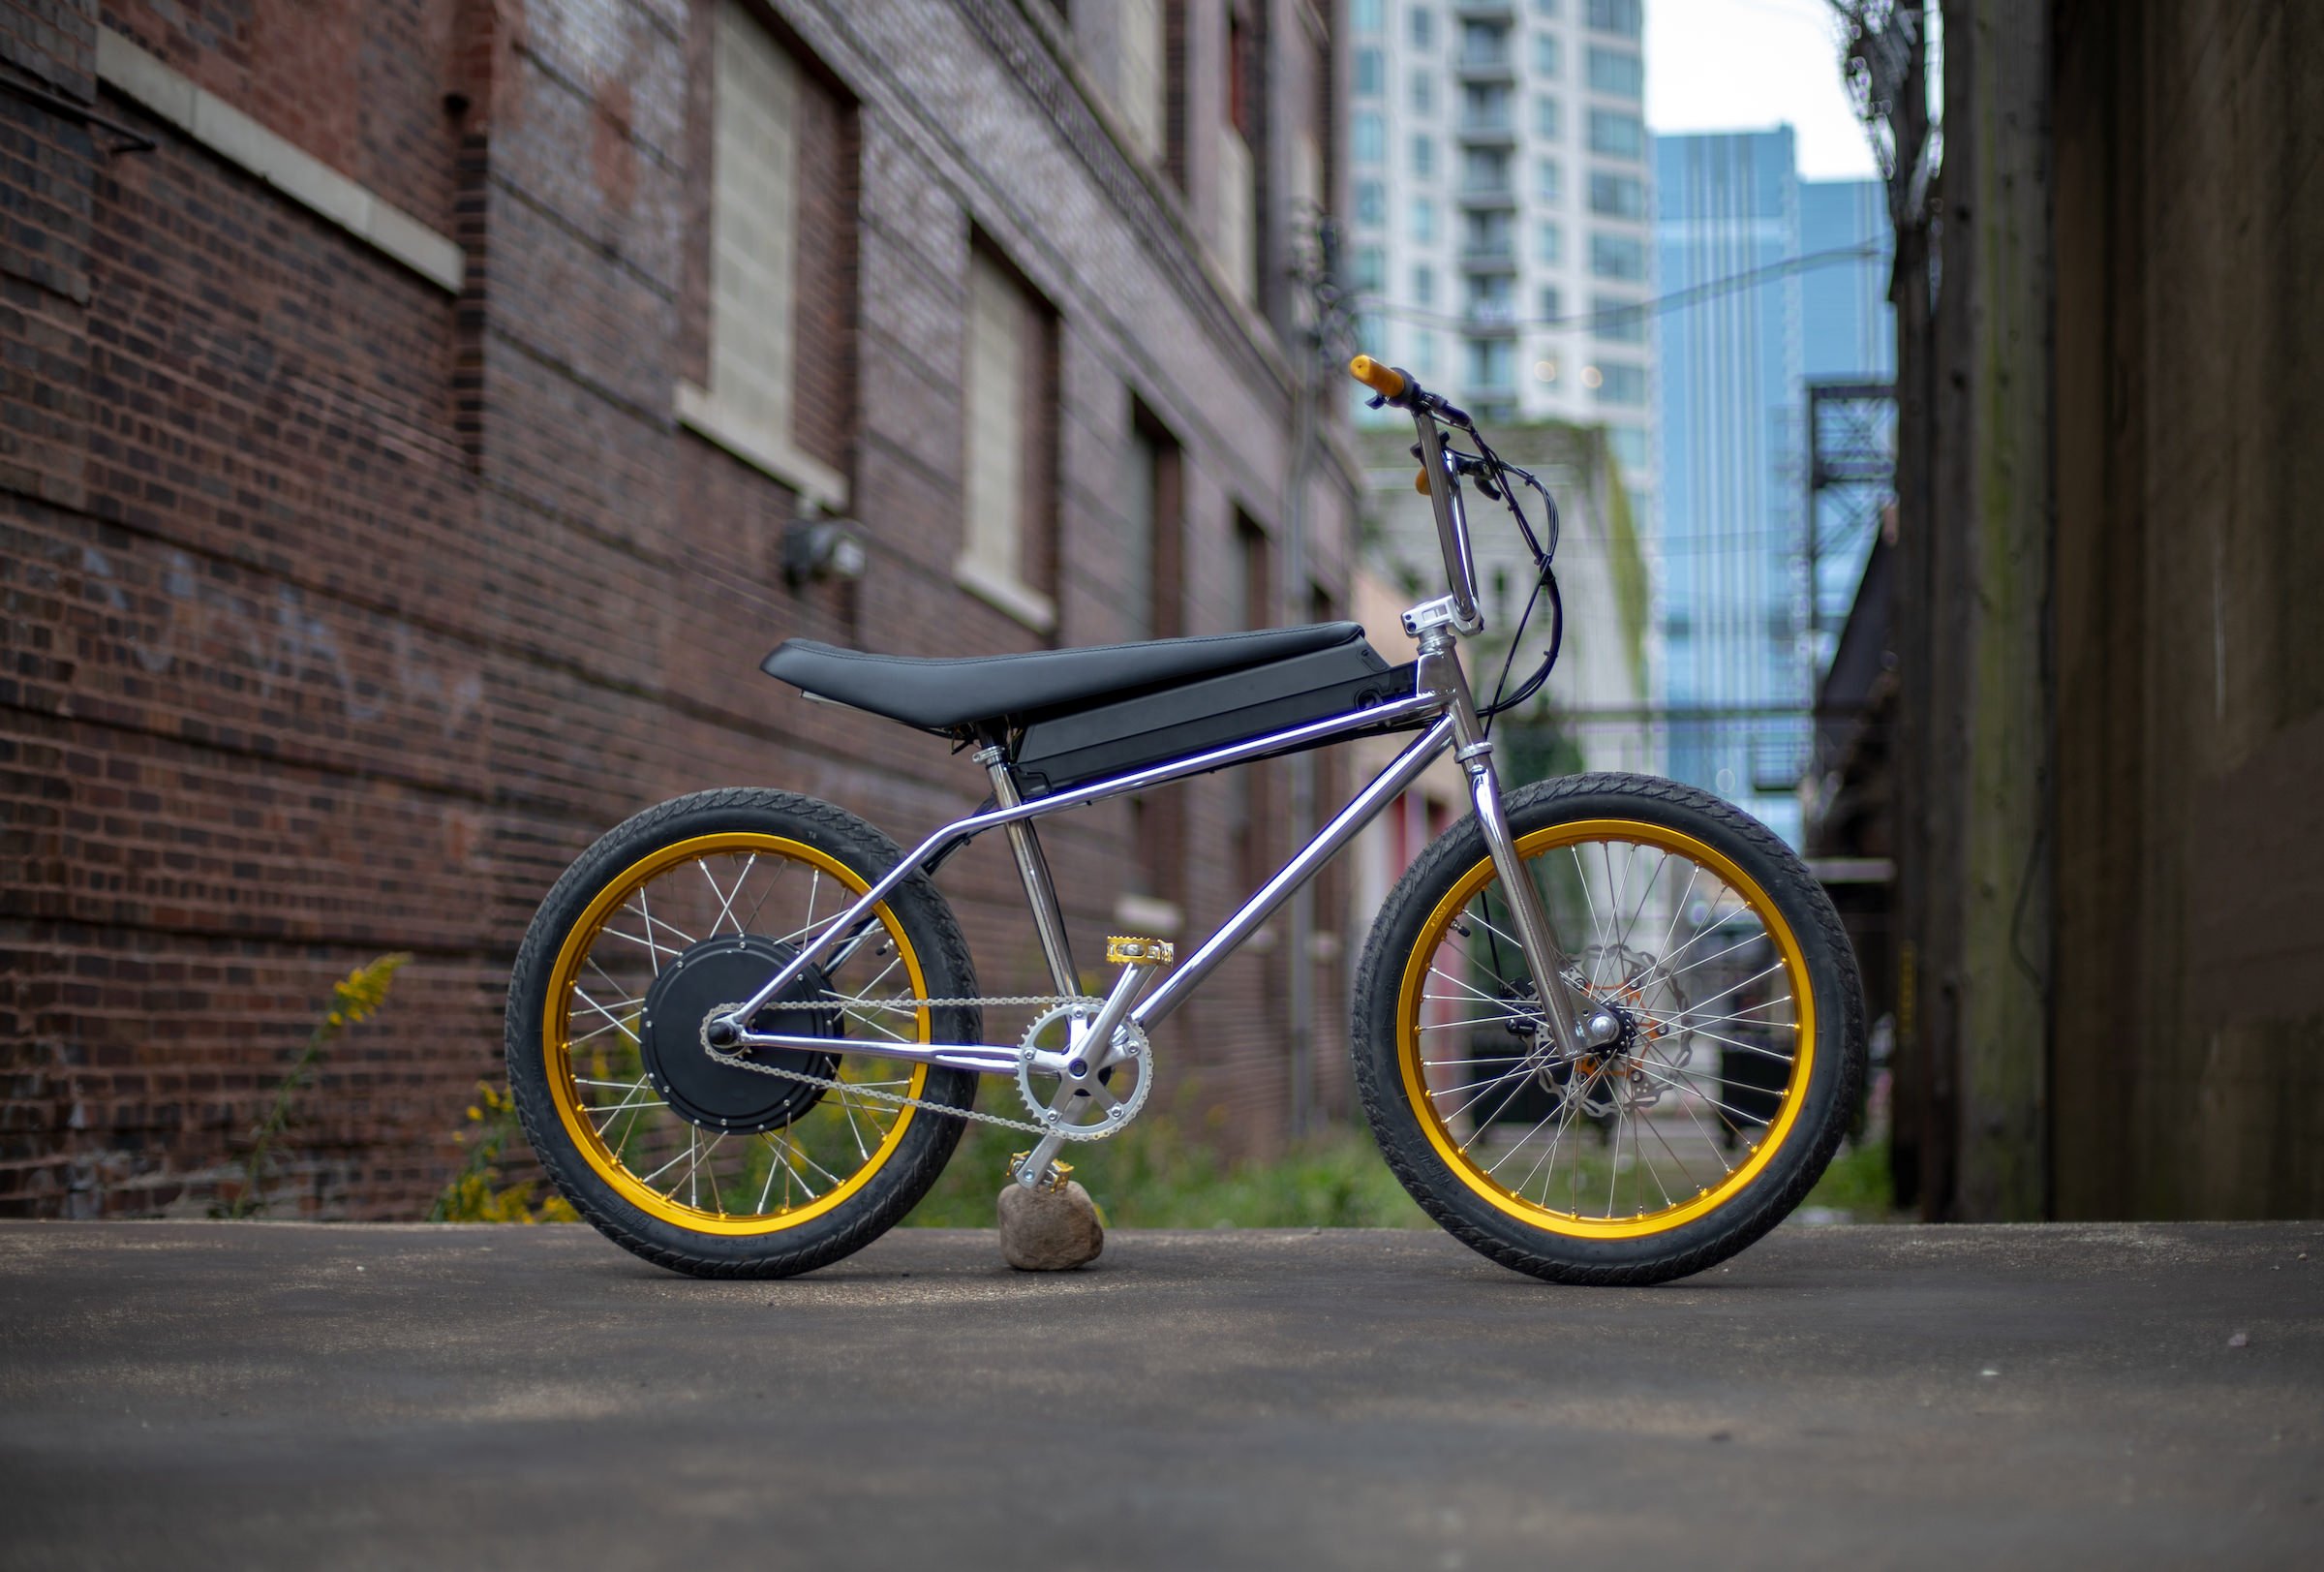 ZOOZ One - An Electric BMX Bike For The 21st Century